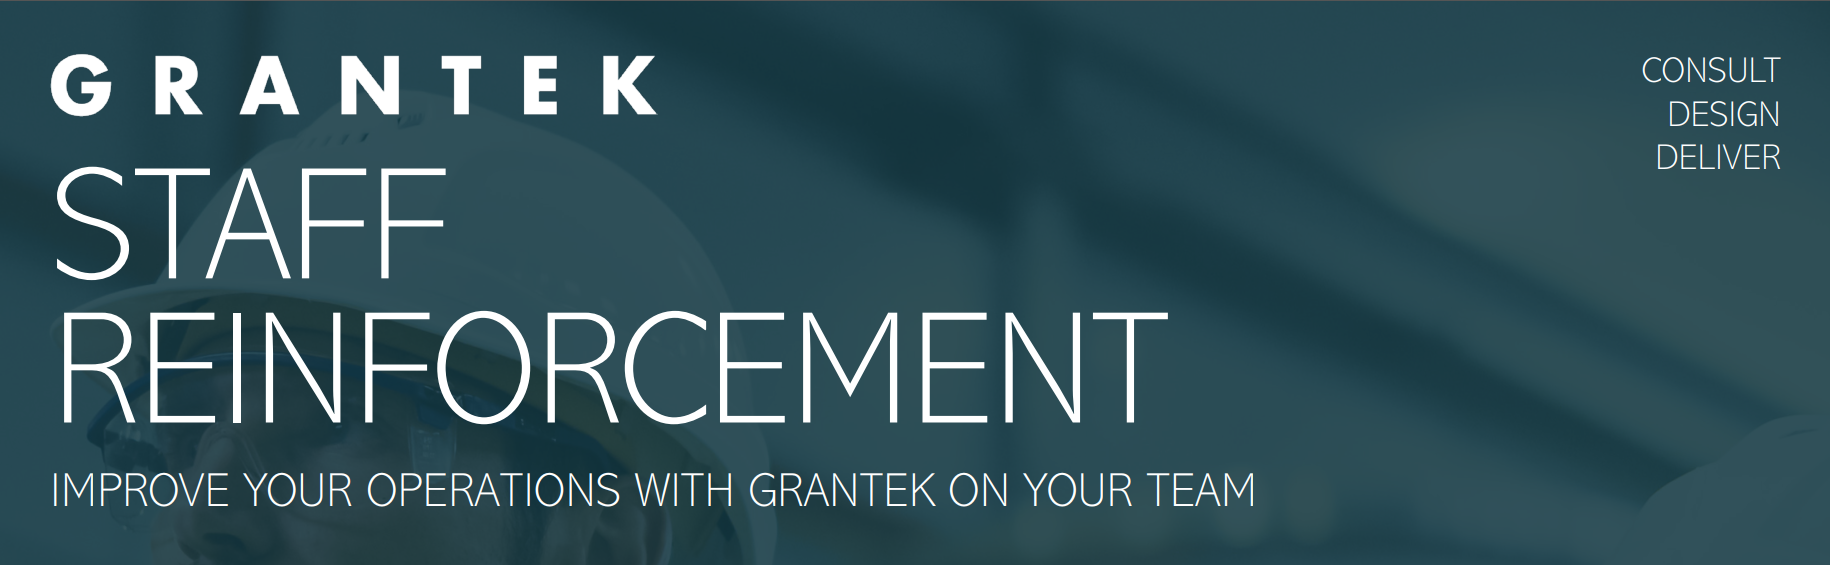 Improve Your Operations with Grantek on Your Team: Grantek’s Staff Reinforcement